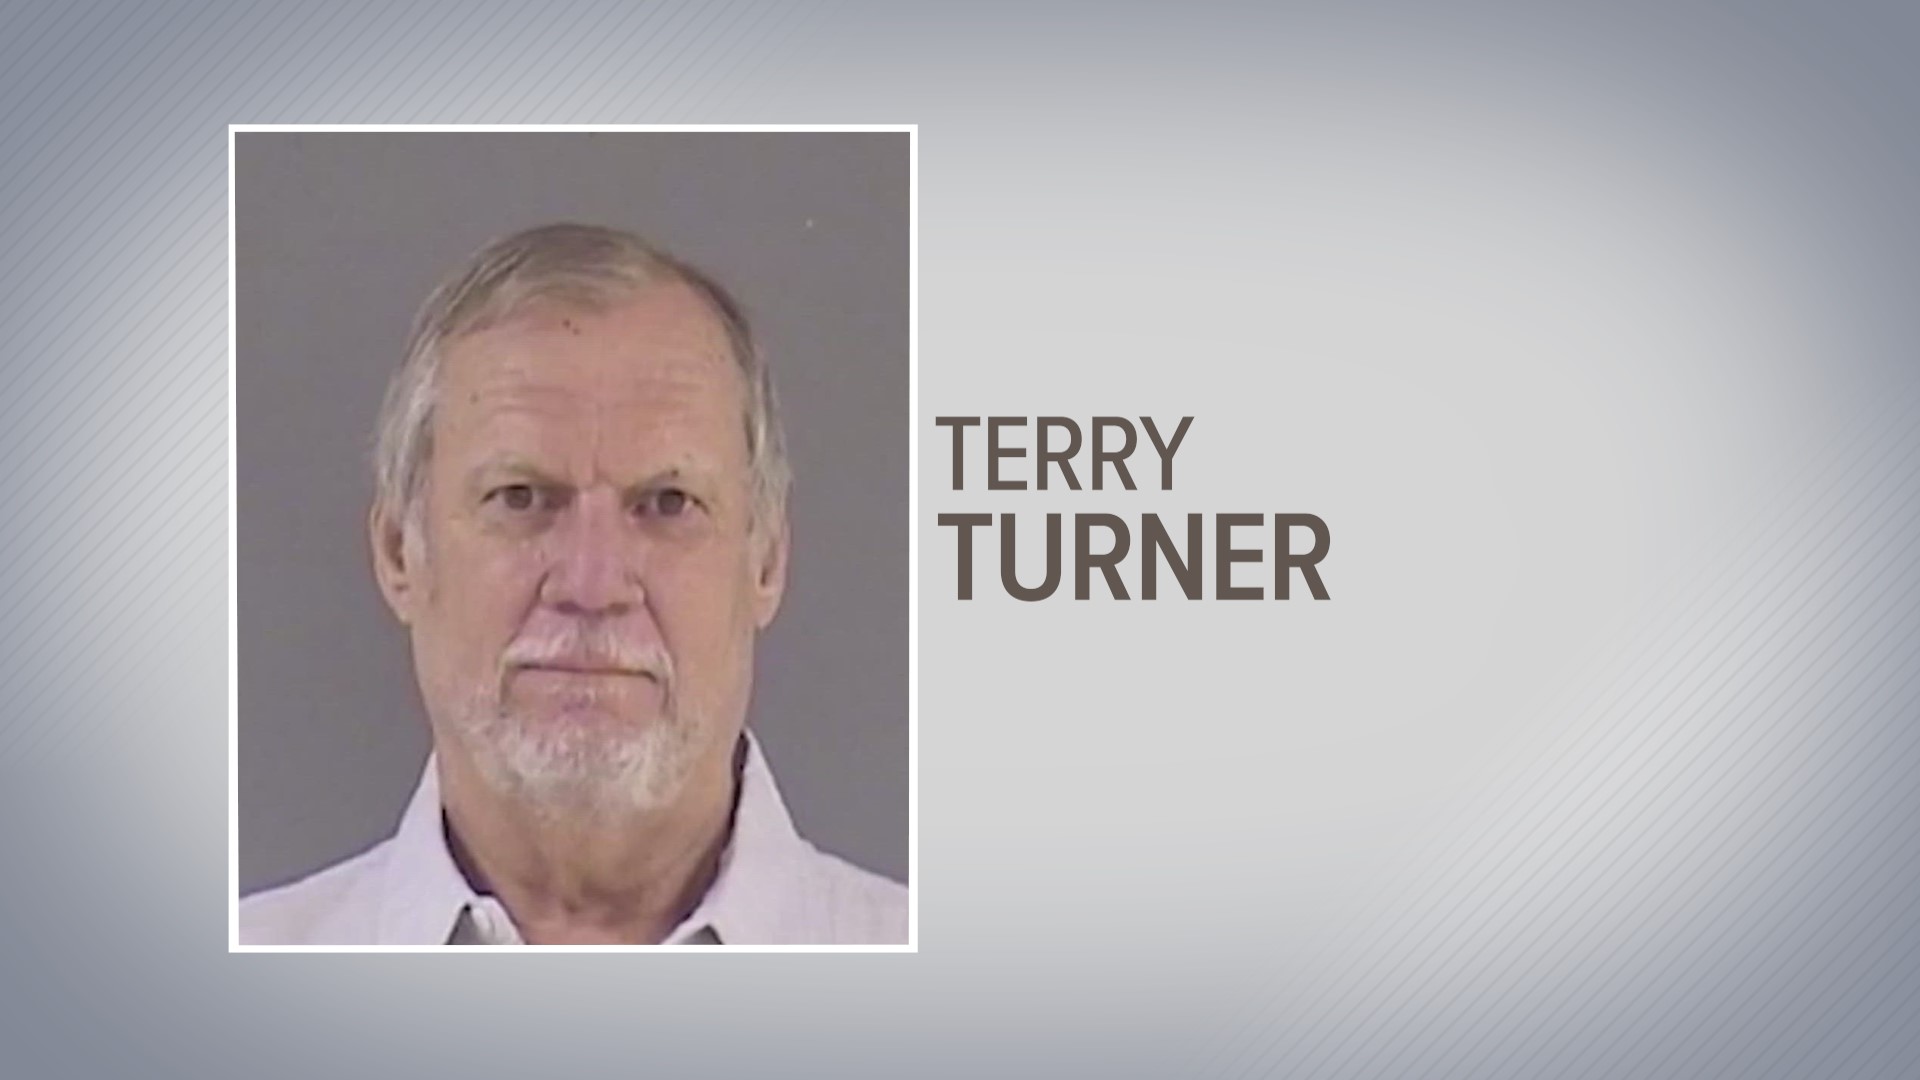 On Thursday, Terry Turner was convicted of killing Adil Dghoughi in 2021.